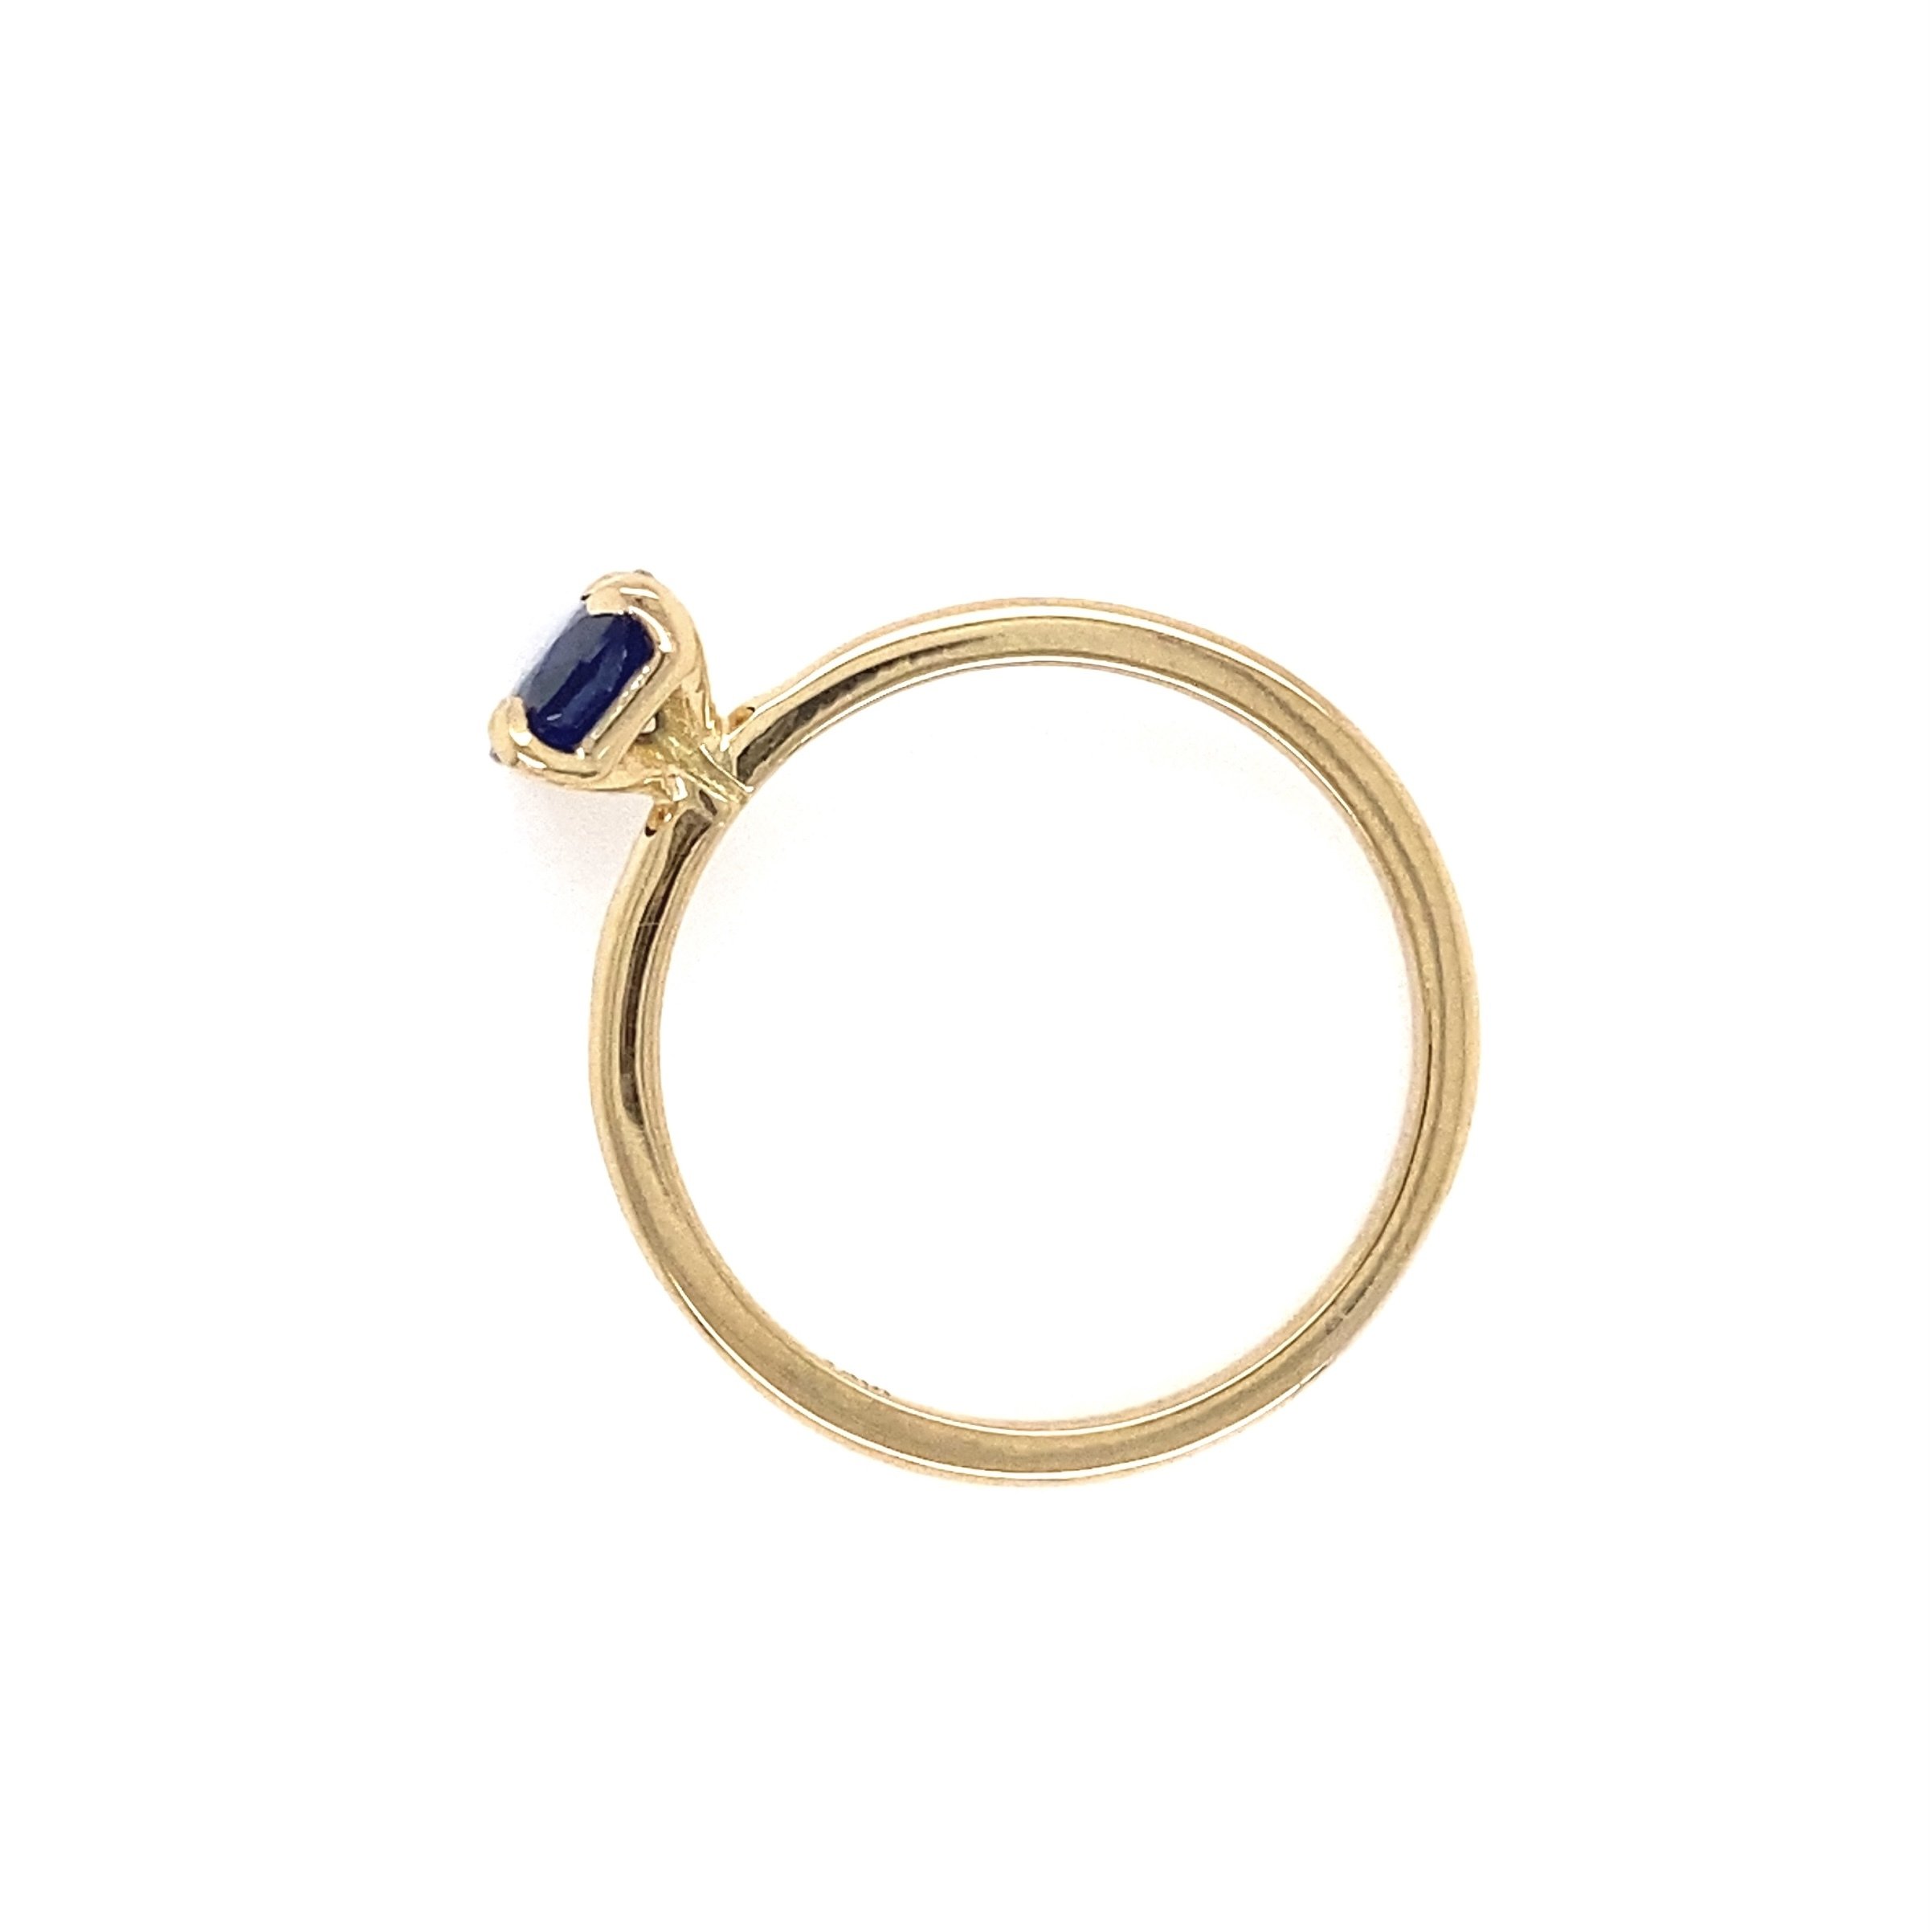 Solitaire 1.10ct Spready Oval Sapphire Ring in 18K Yellow Gold, s7